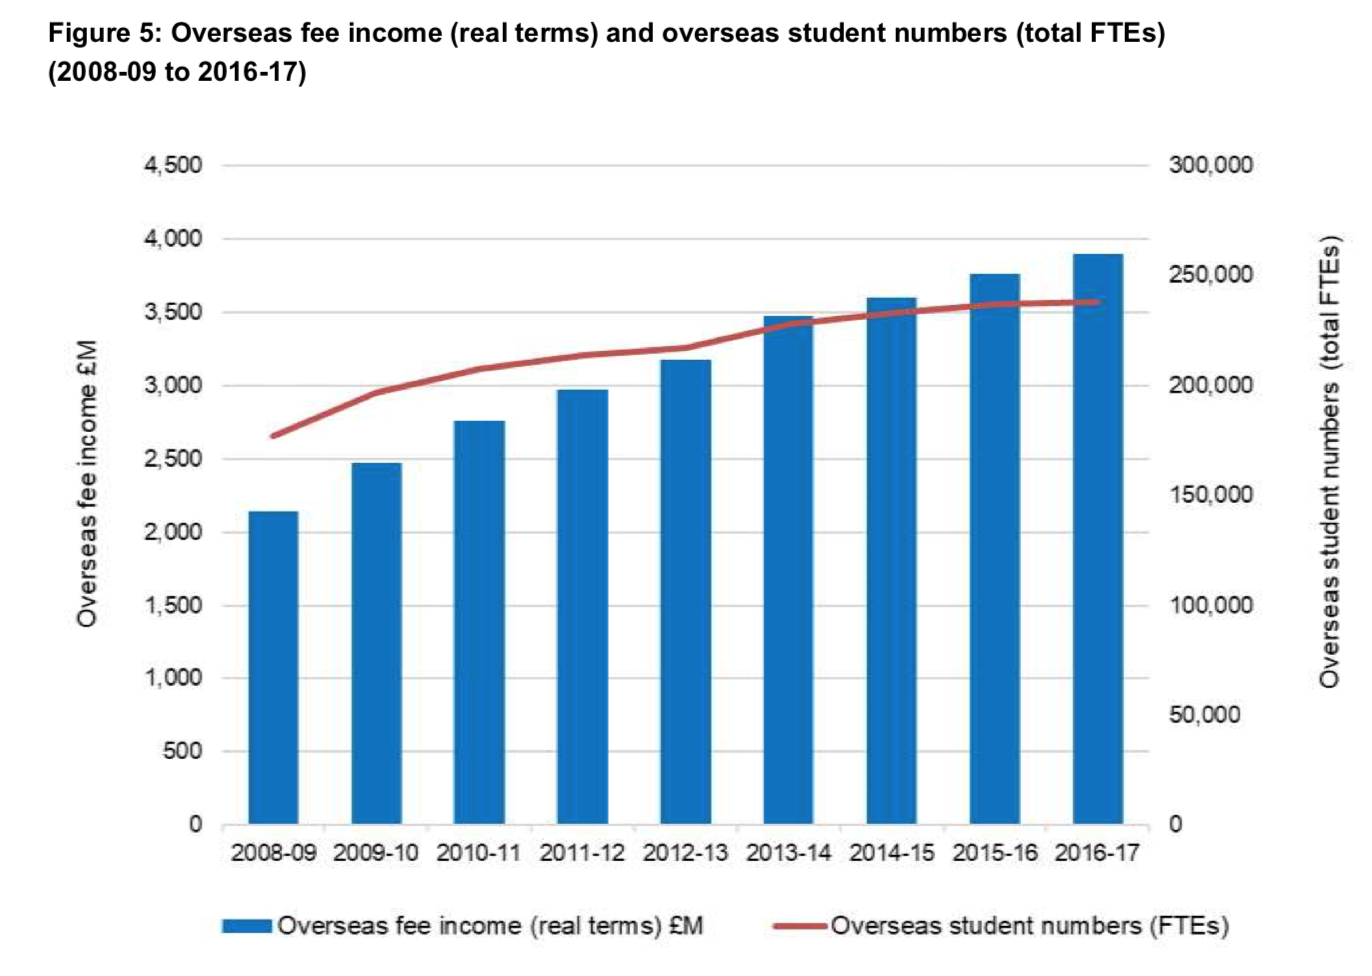 Overseas fee income and student numbers for English universities